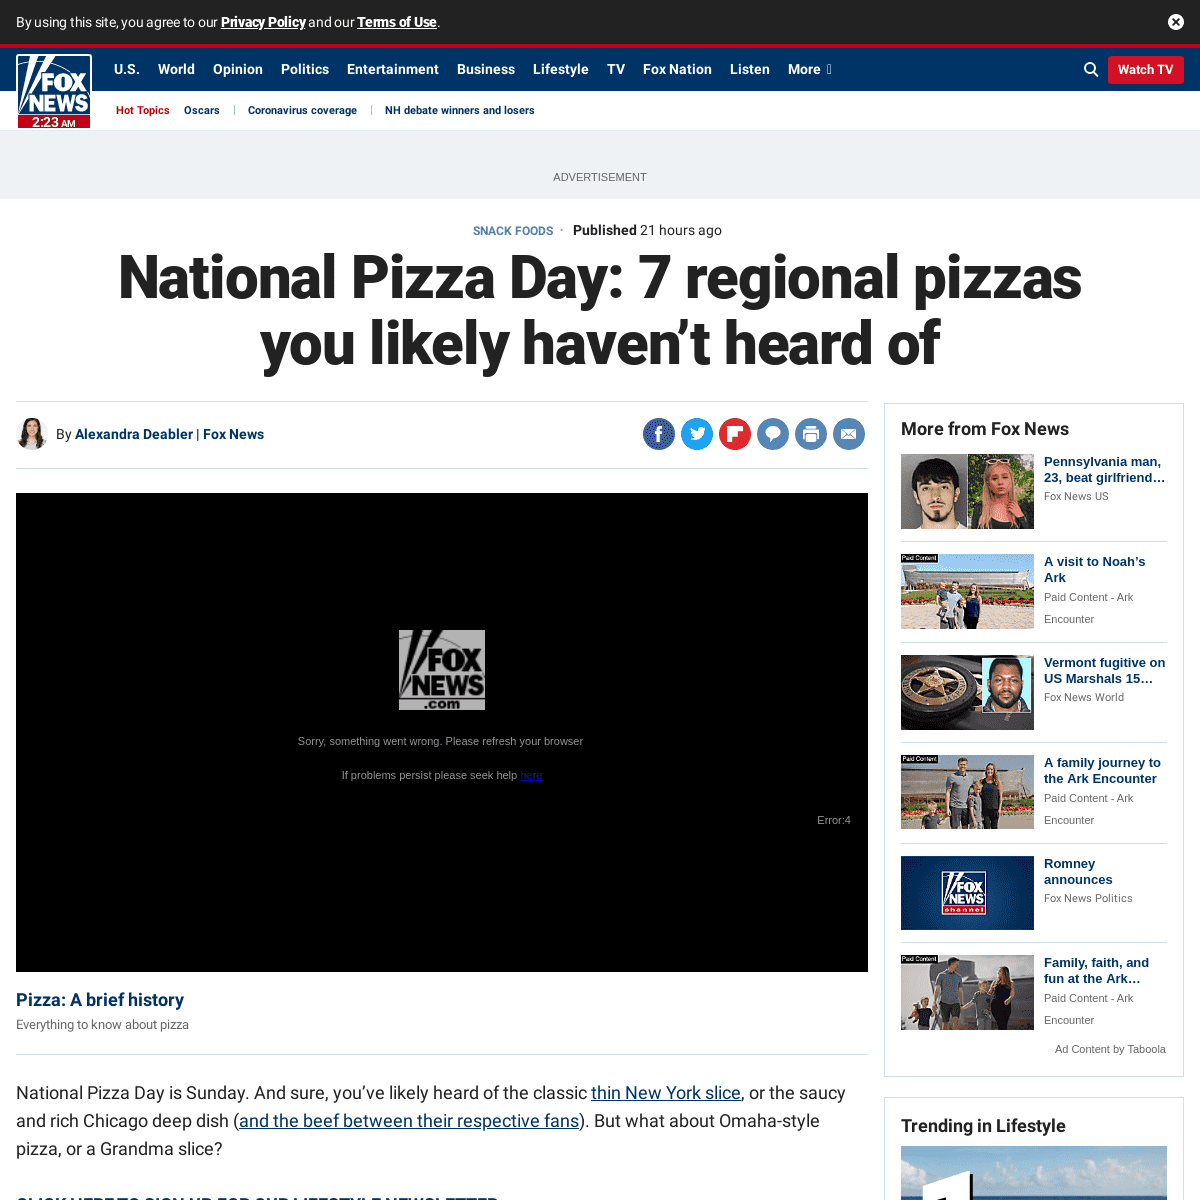 A complete backup of www.foxnews.com/food-drink/7-regional-pizzas-you-likely-havent-heard-of-national-pizza-day